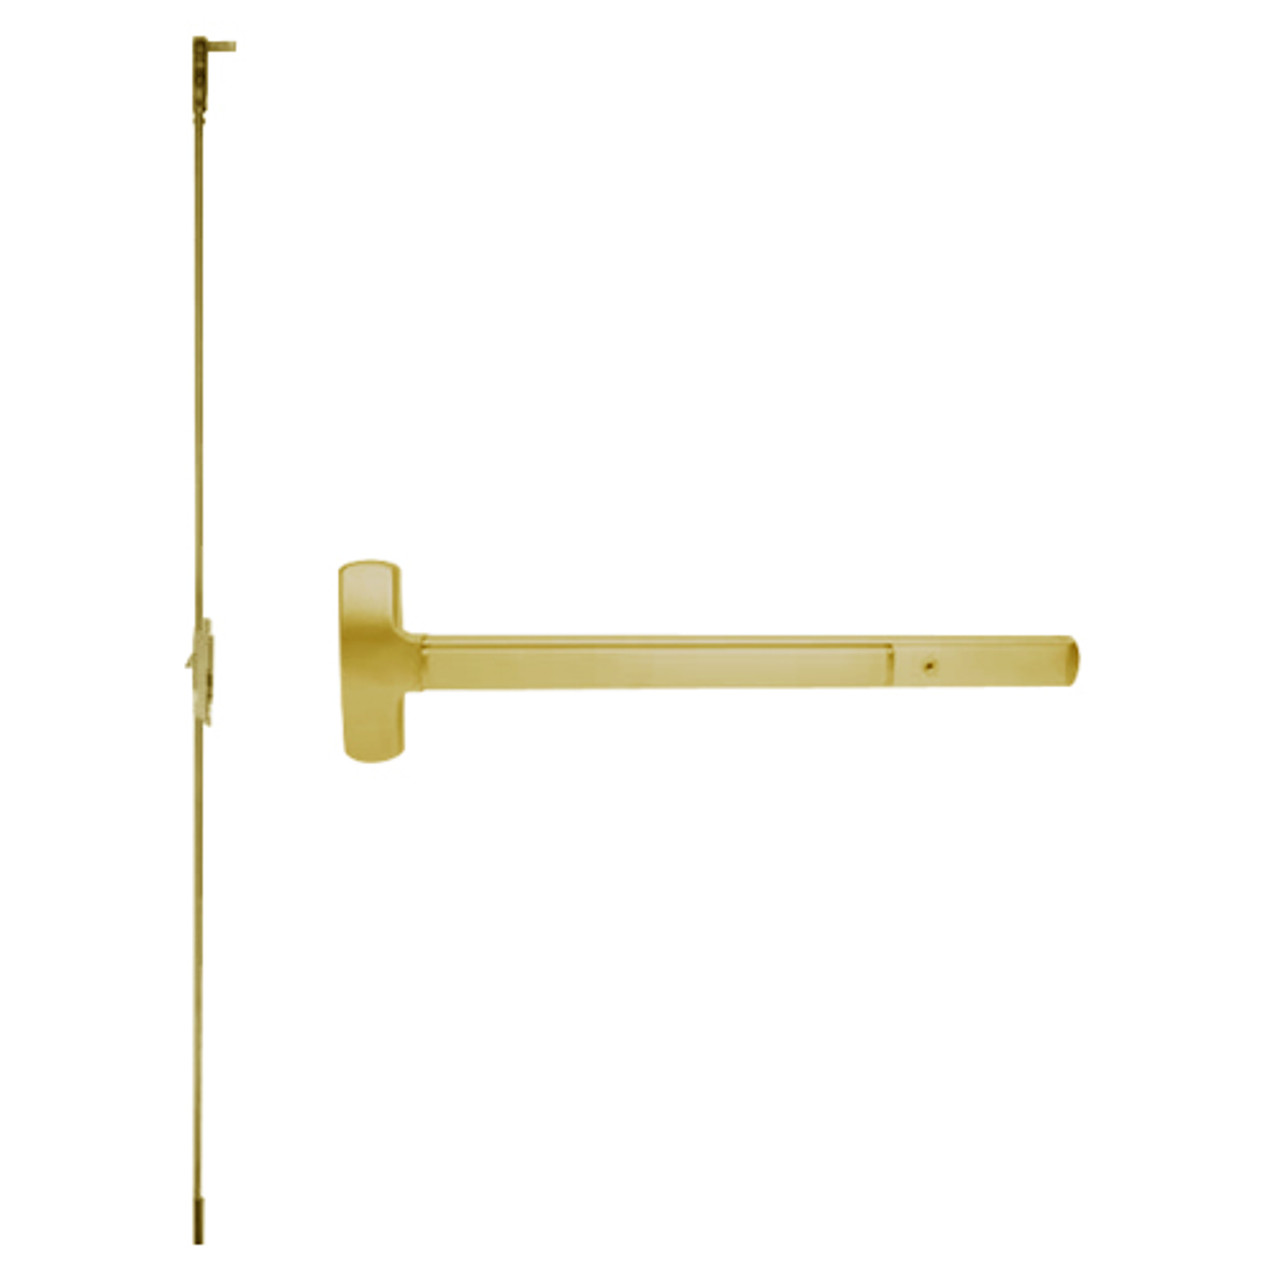 25-C-EO-US3-4 Falcon Exit Device in Polished Brass